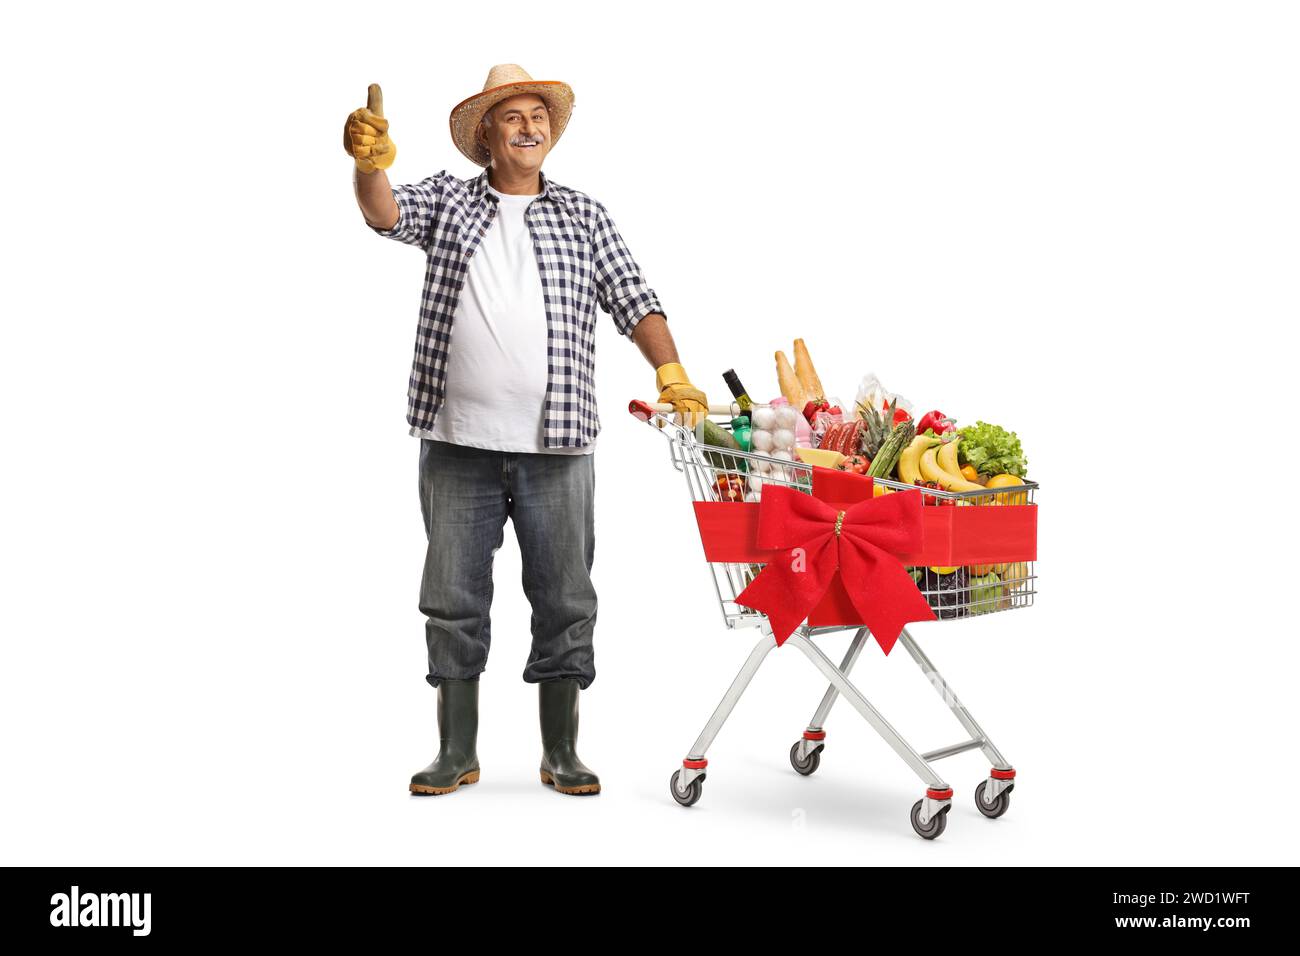 Full length portrait of a farmer with a shopping cart full of food products waving isolated on white background Stock Photo